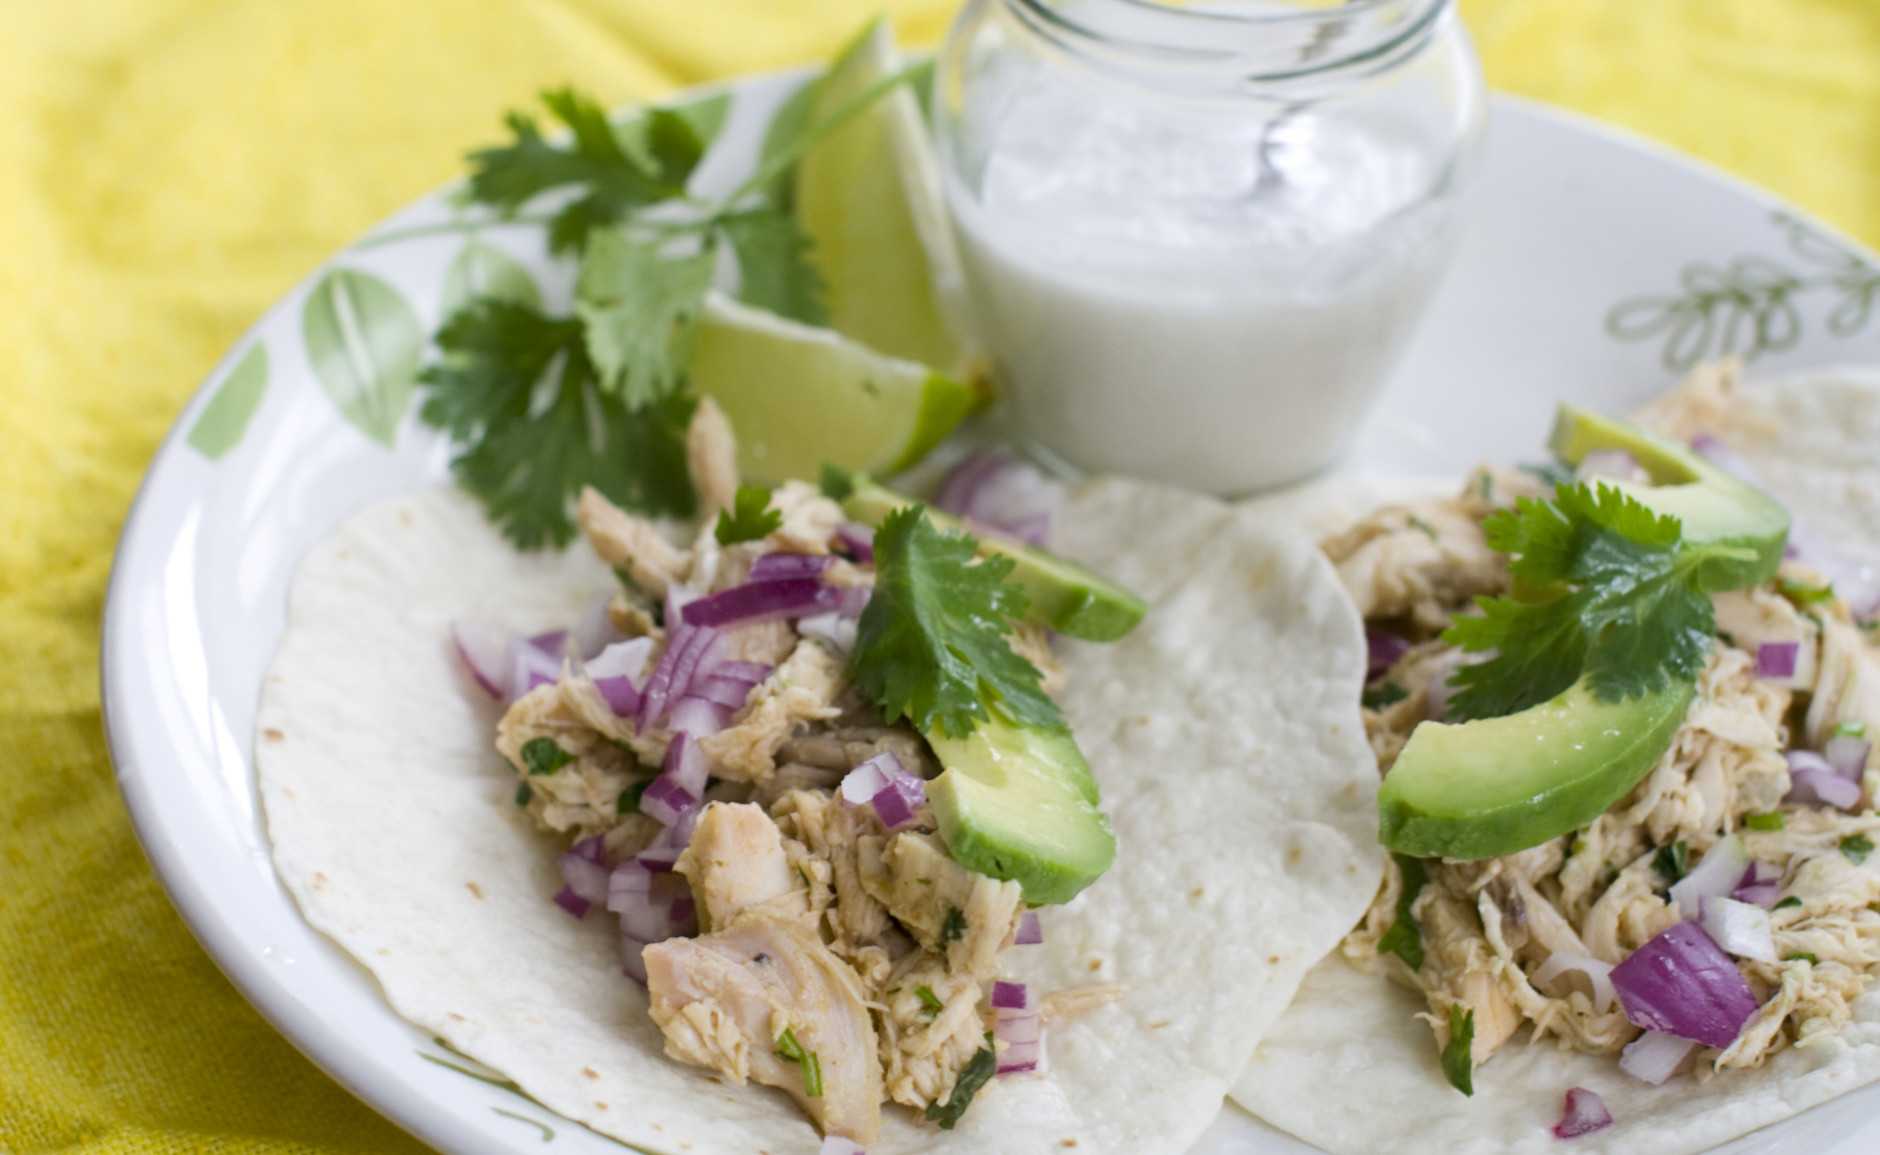 In this undated image shows a plate of coconut-lime pulled chicken tacos in Concord, N.H. (AP Photo/Matthew Mead)